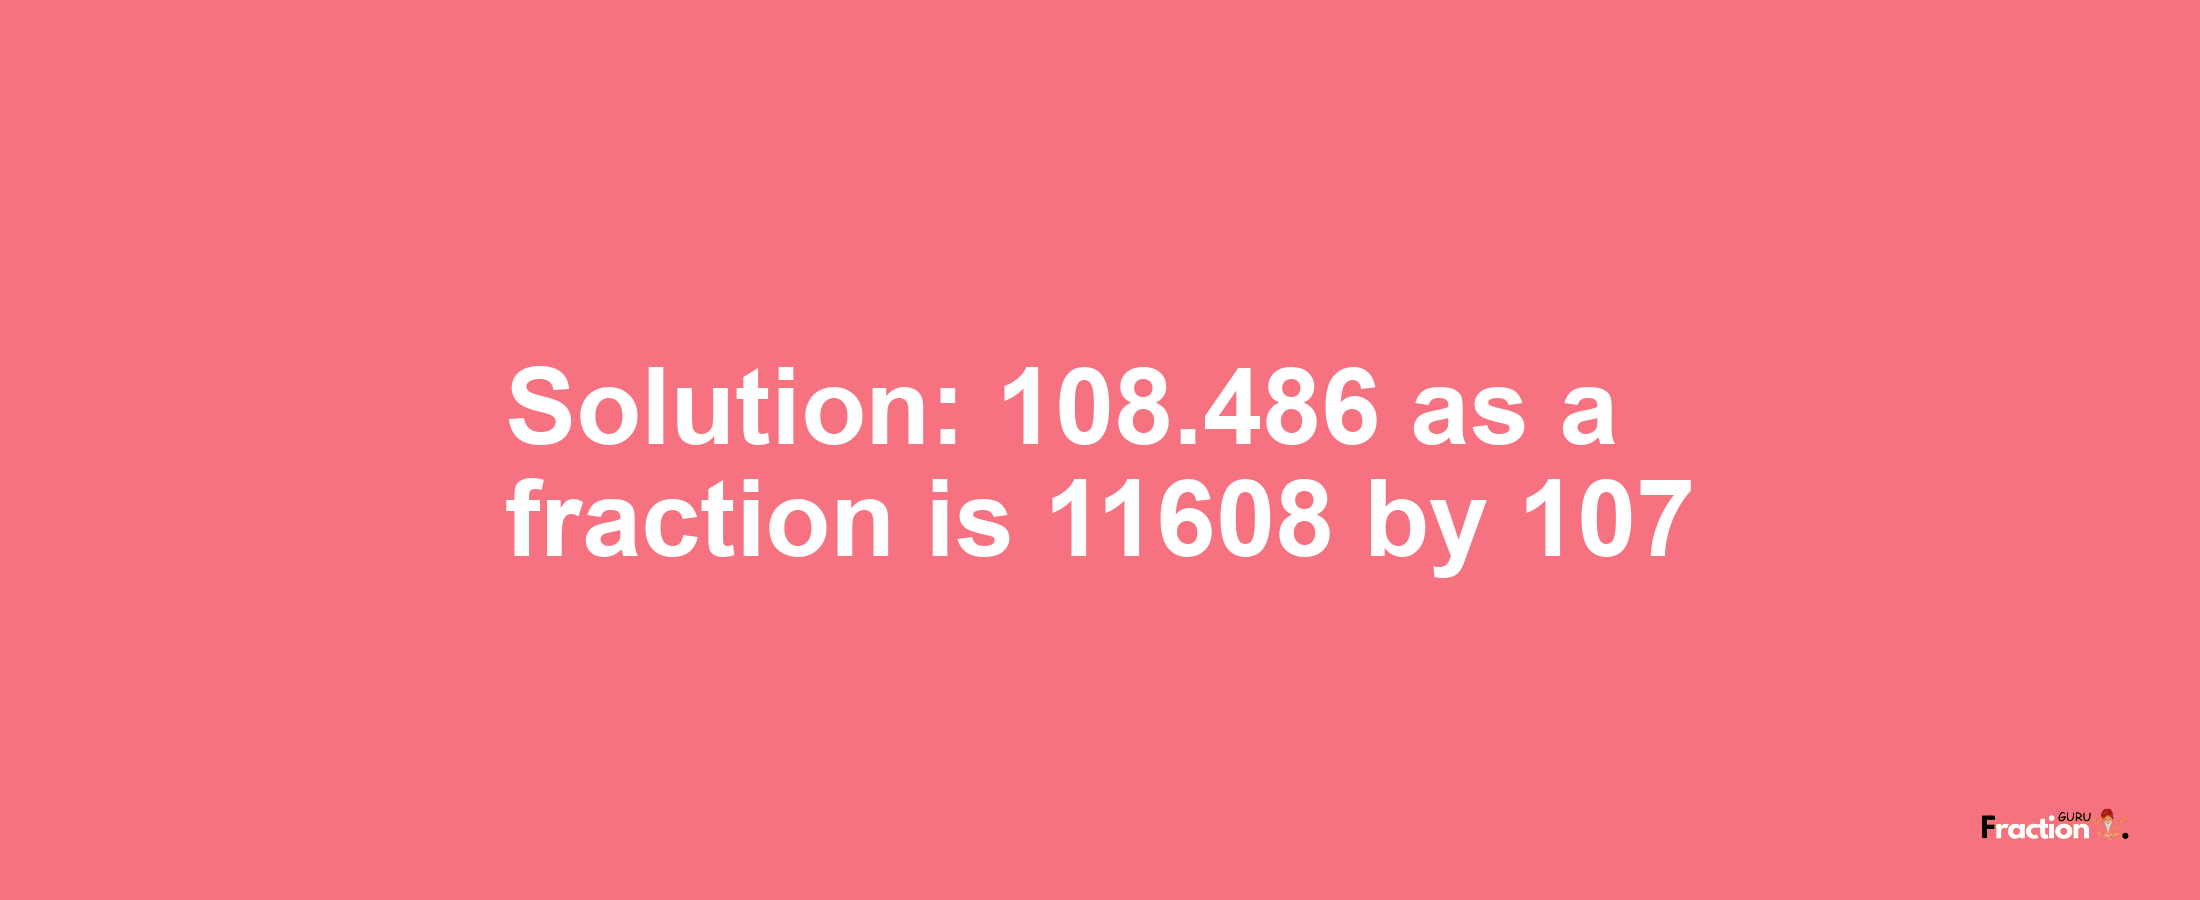 Solution:108.486 as a fraction is 11608/107